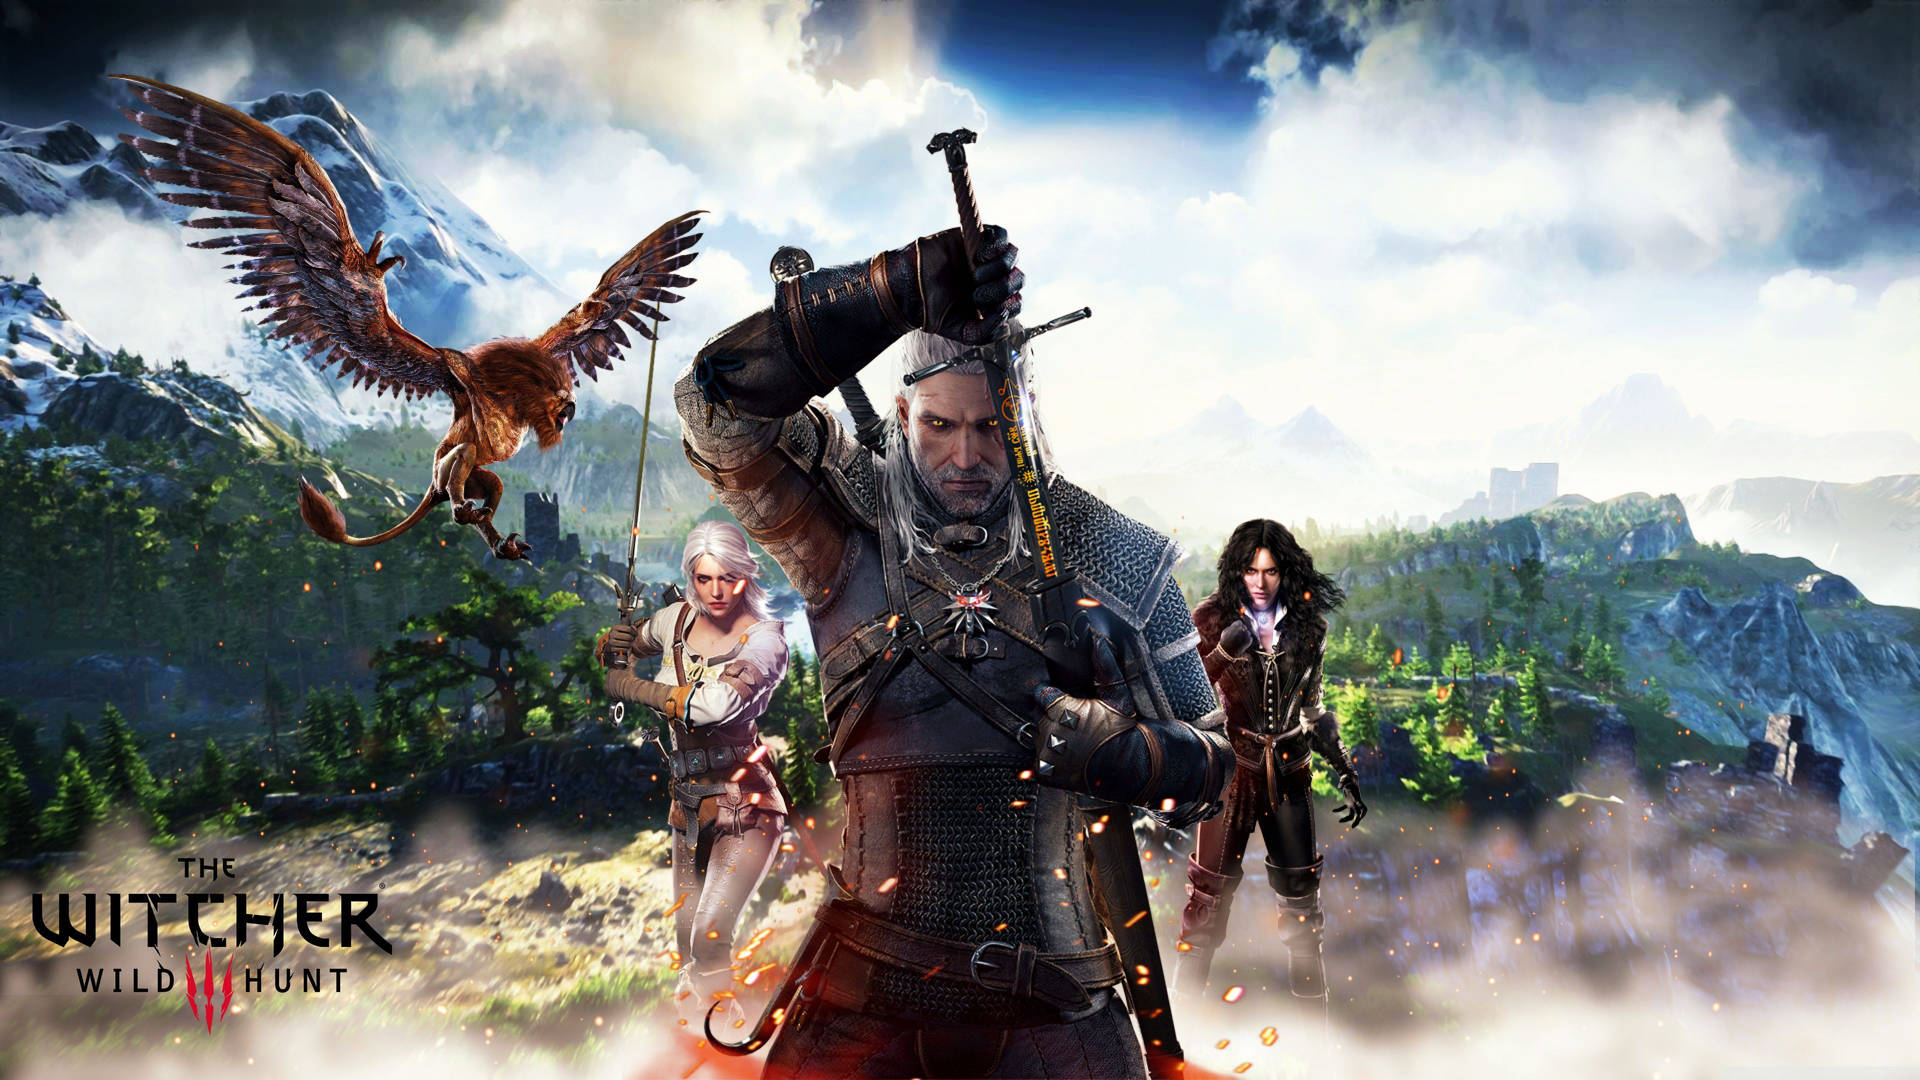 The Witcher Wild Hunt Poster